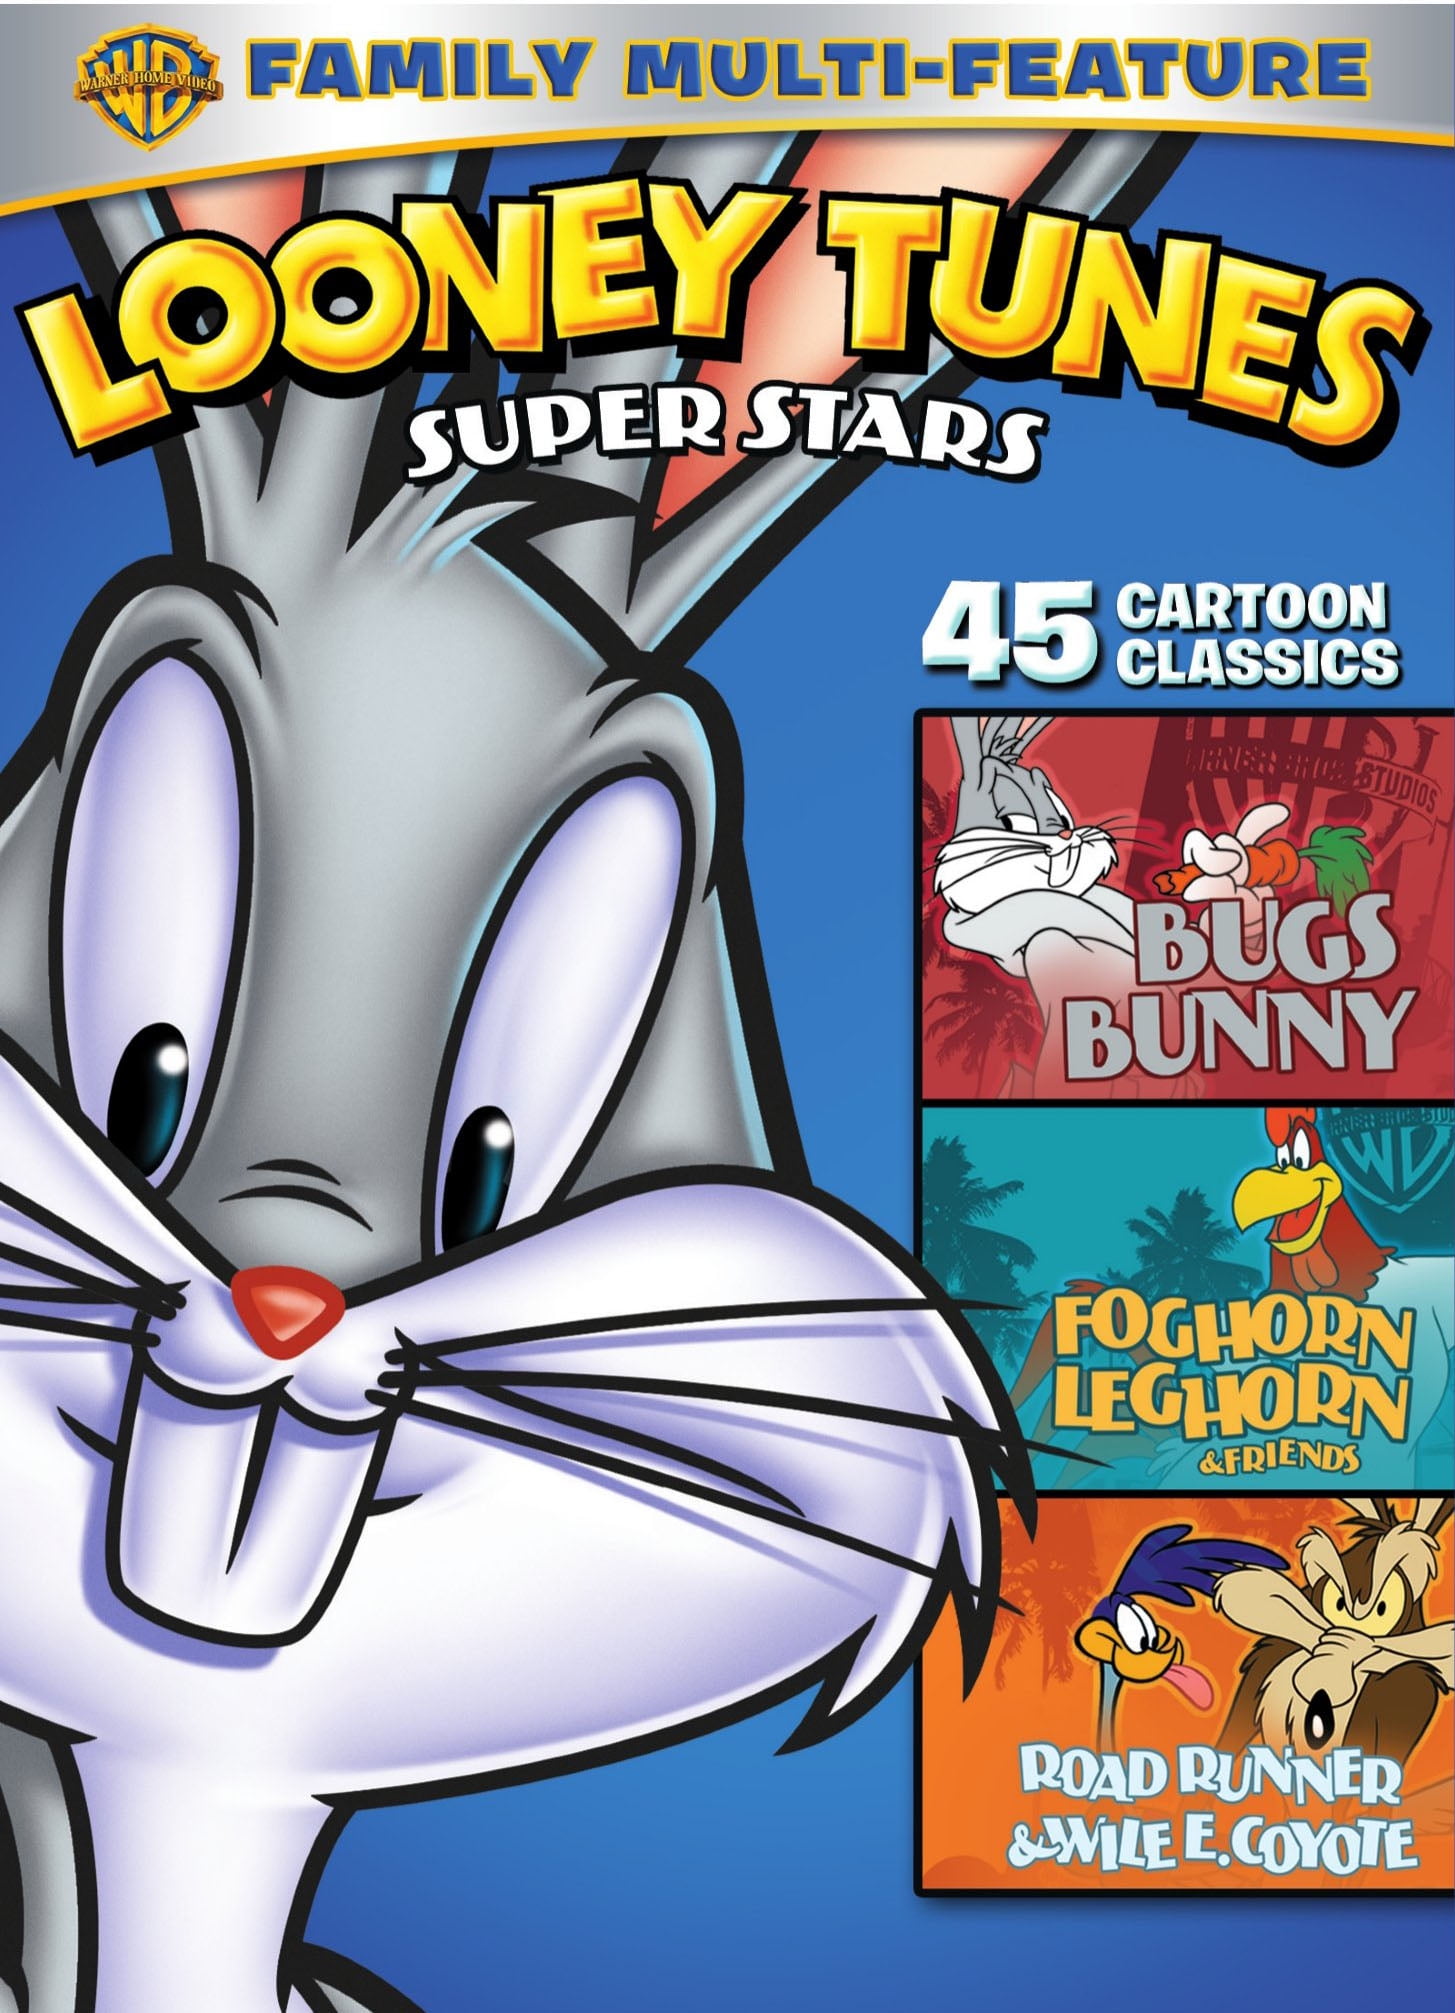 Looney Tunes Super Stars Family Multi-Feature (Bugs Bunny / Foghorn Leghorn  & Friends / Road Runner & Wyle E. Coyote) (DVD)